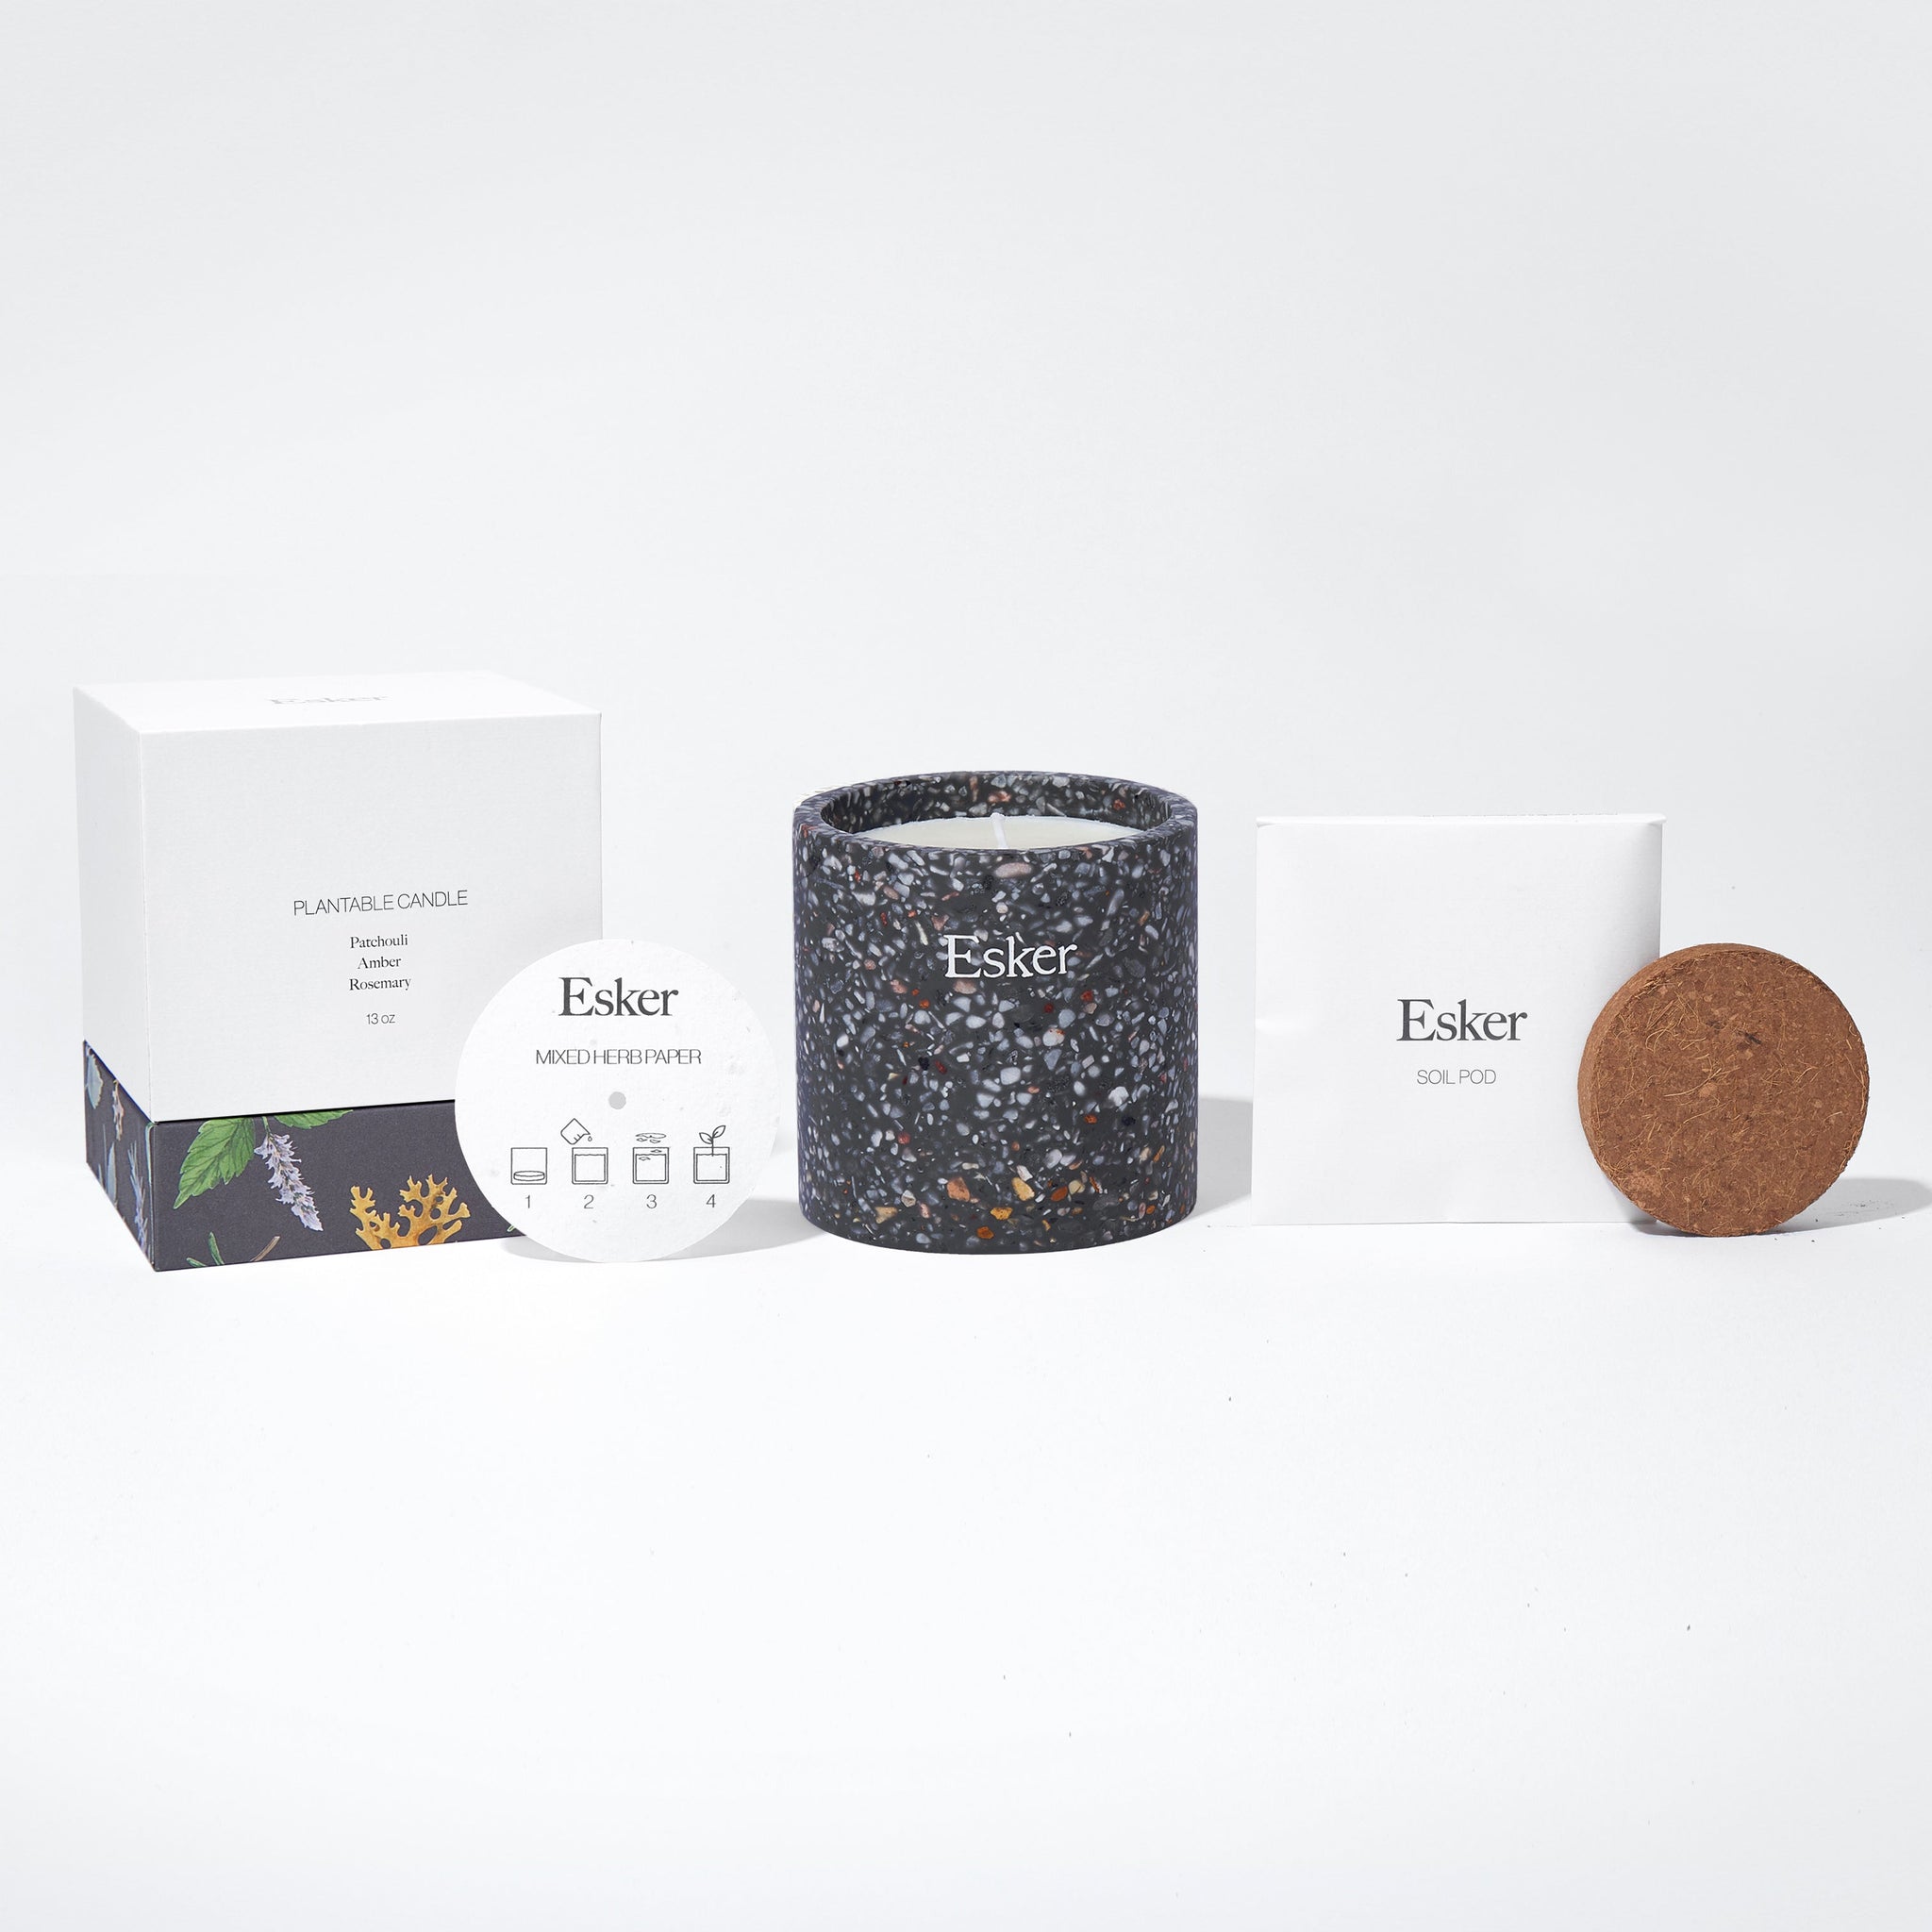 Travertine Plantable Candle by Esker